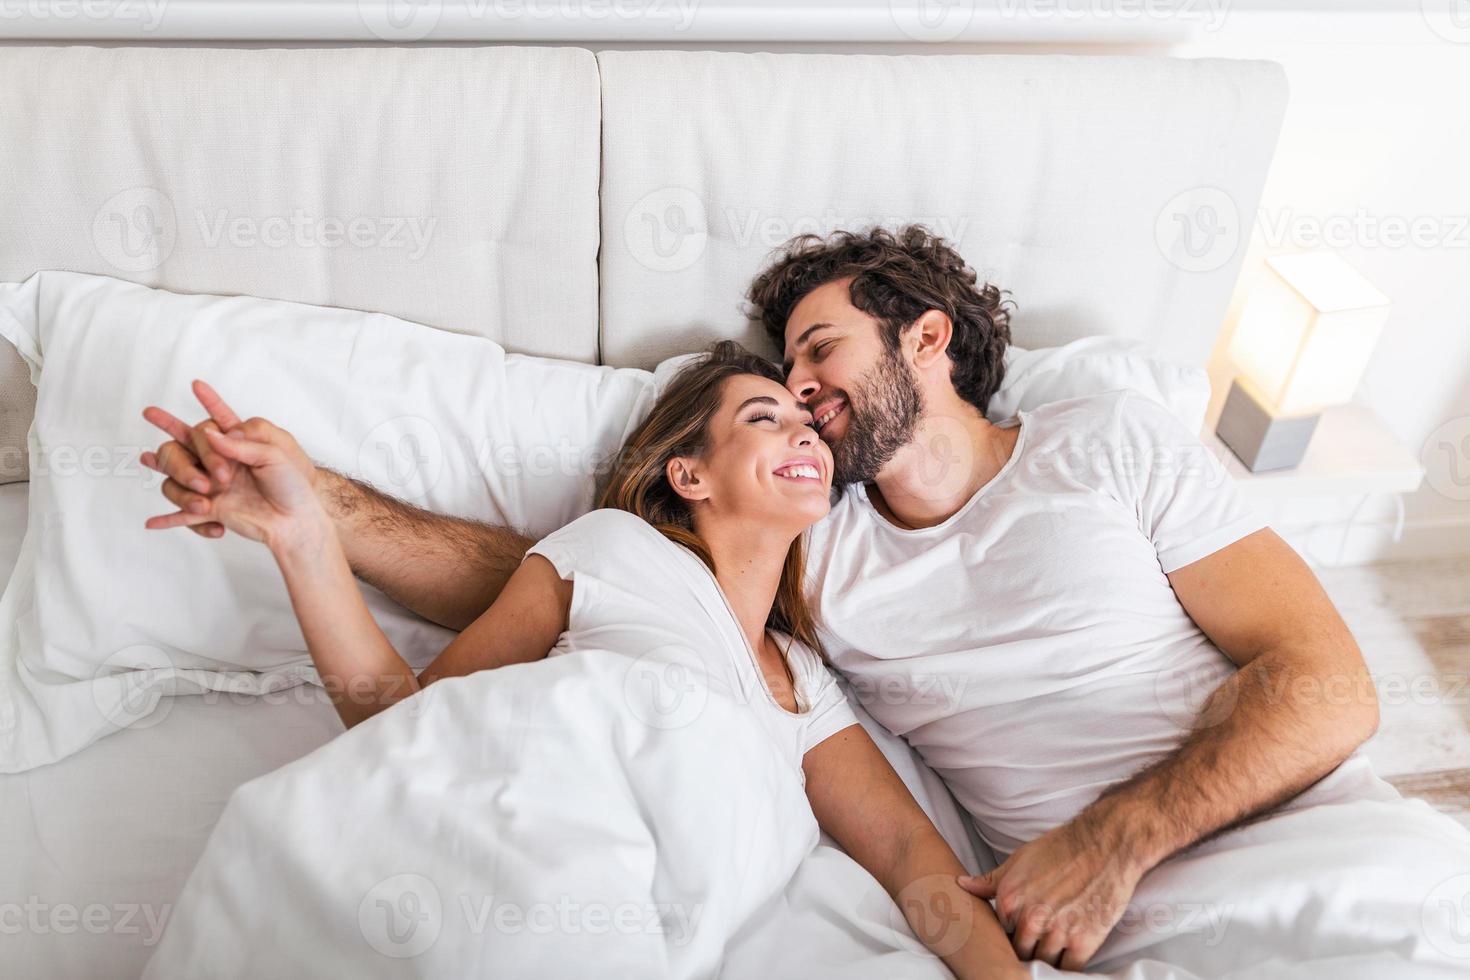 Happy couple is lying in bed together. Enjoying the company of each other.Happy young couple hugging and smiling while lying on the bed in a bedroom at home. photo